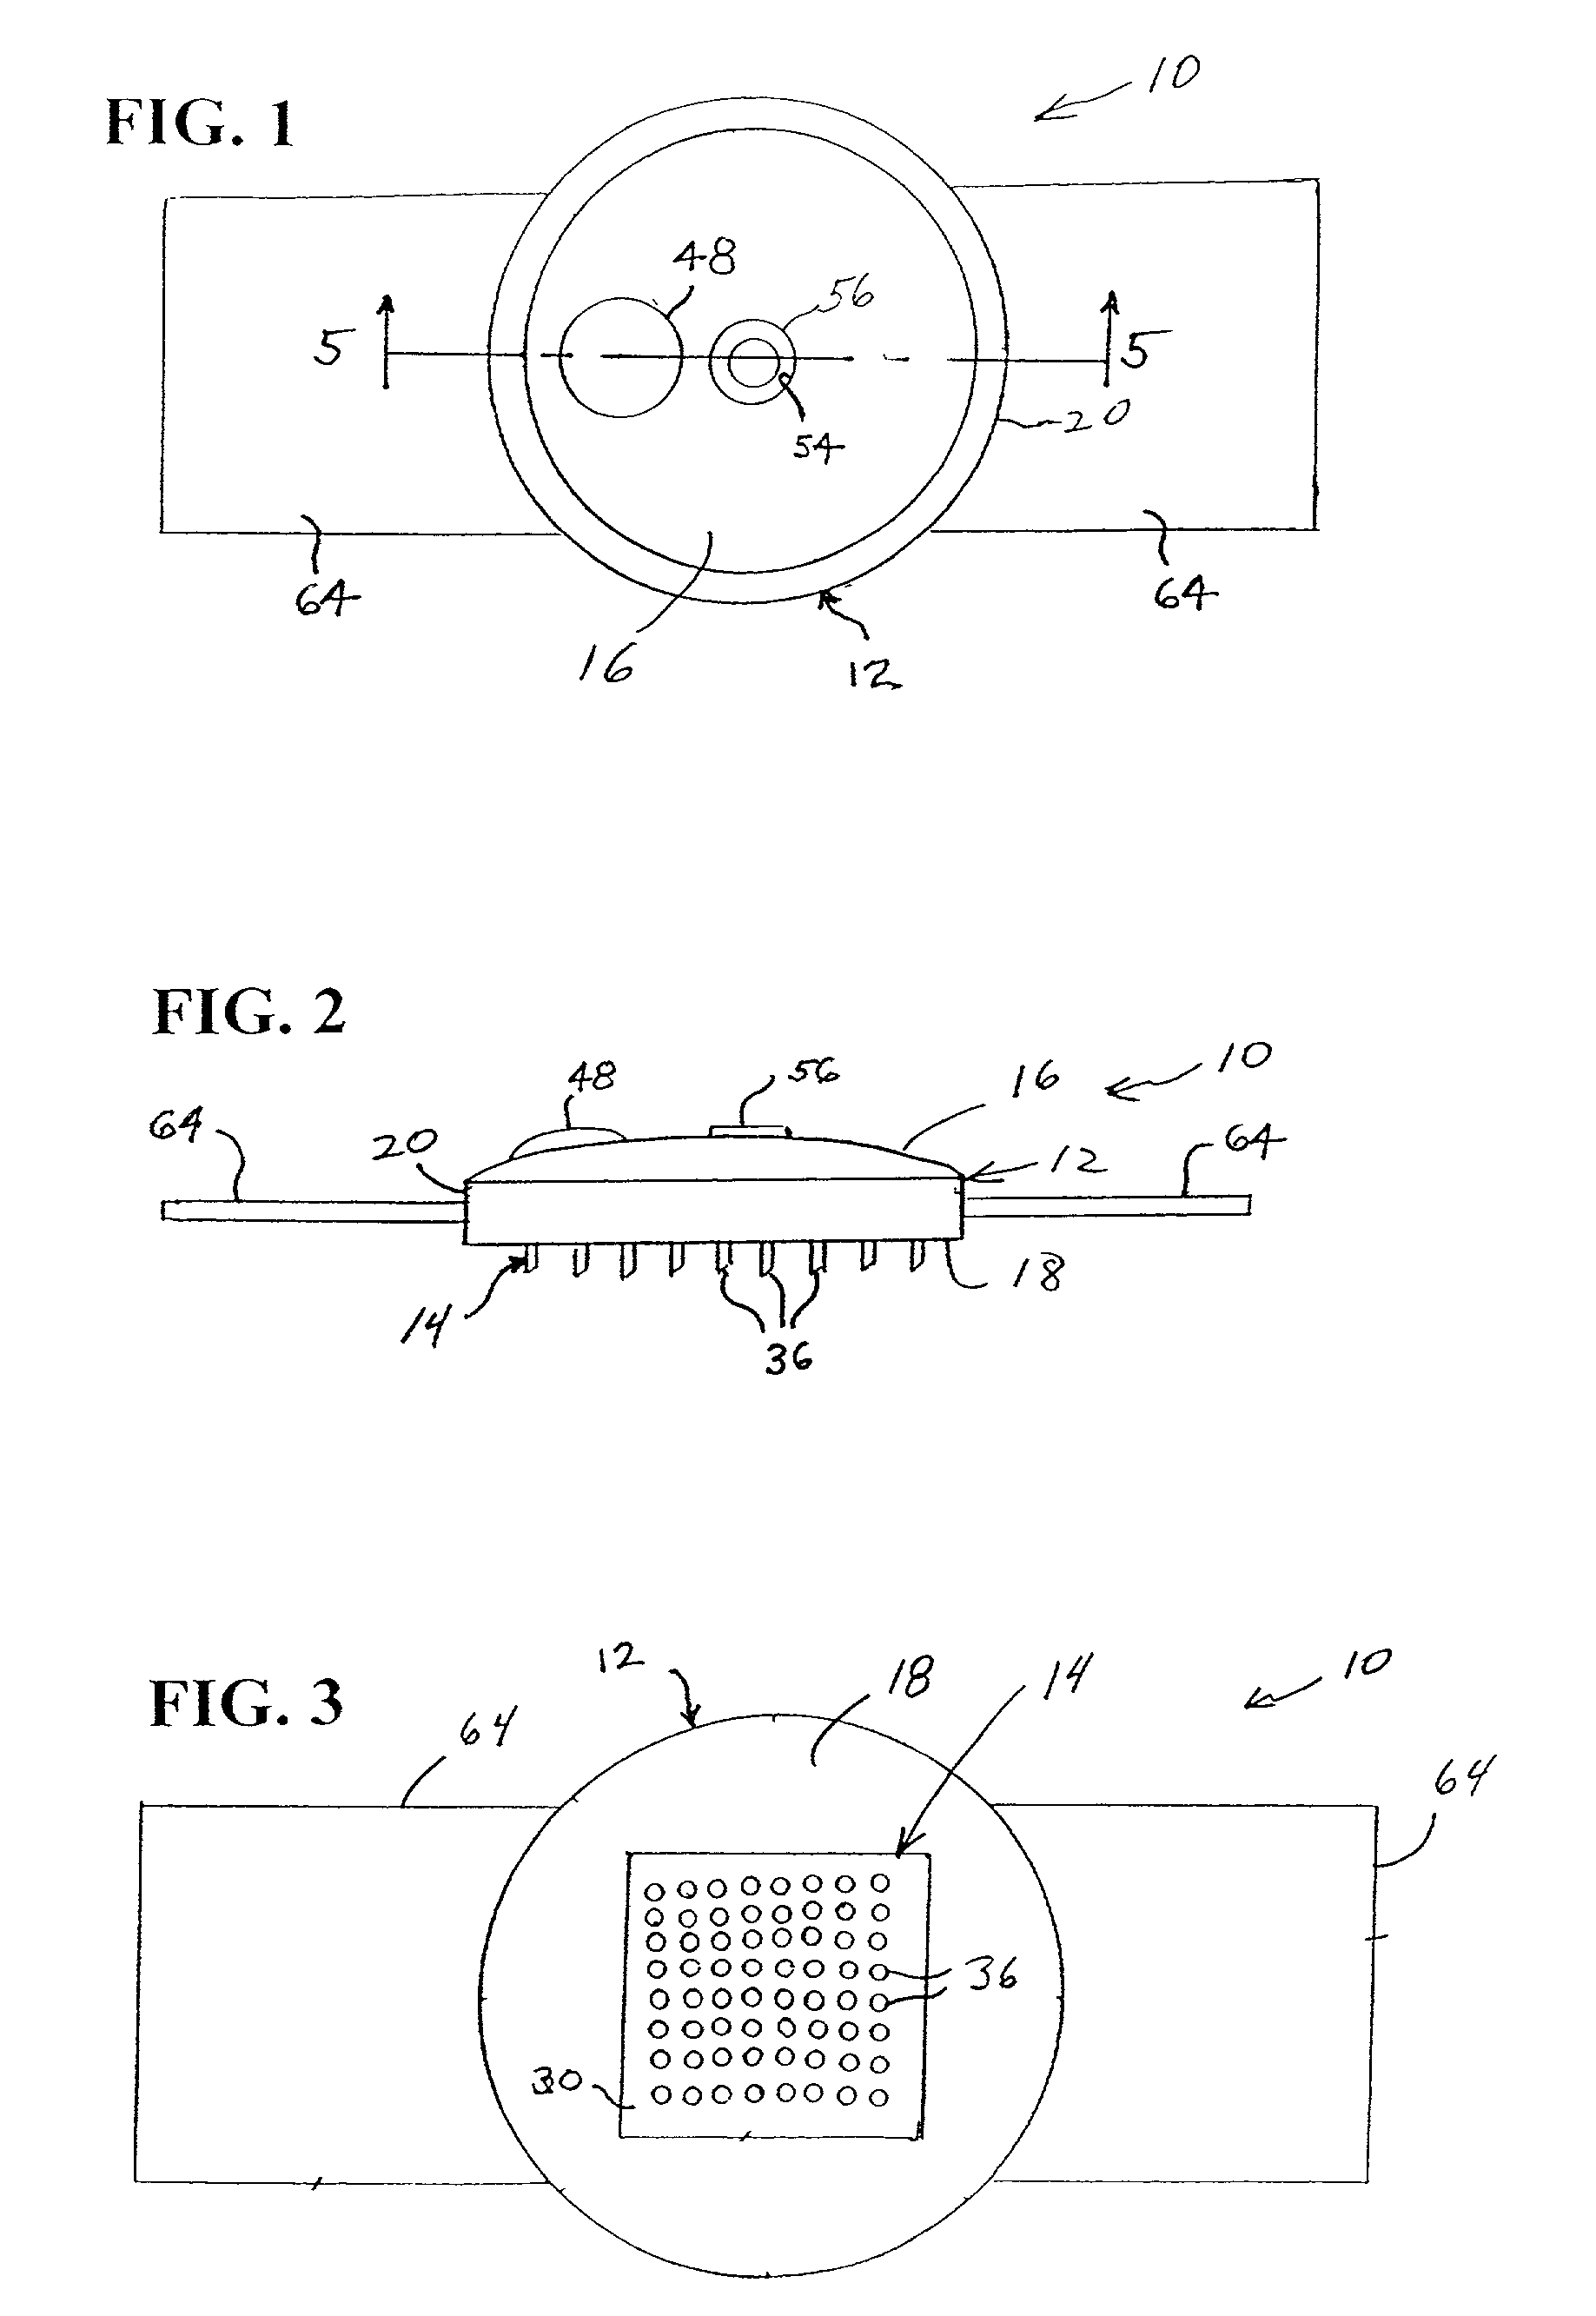 Method and device for intradermally delivering a substance